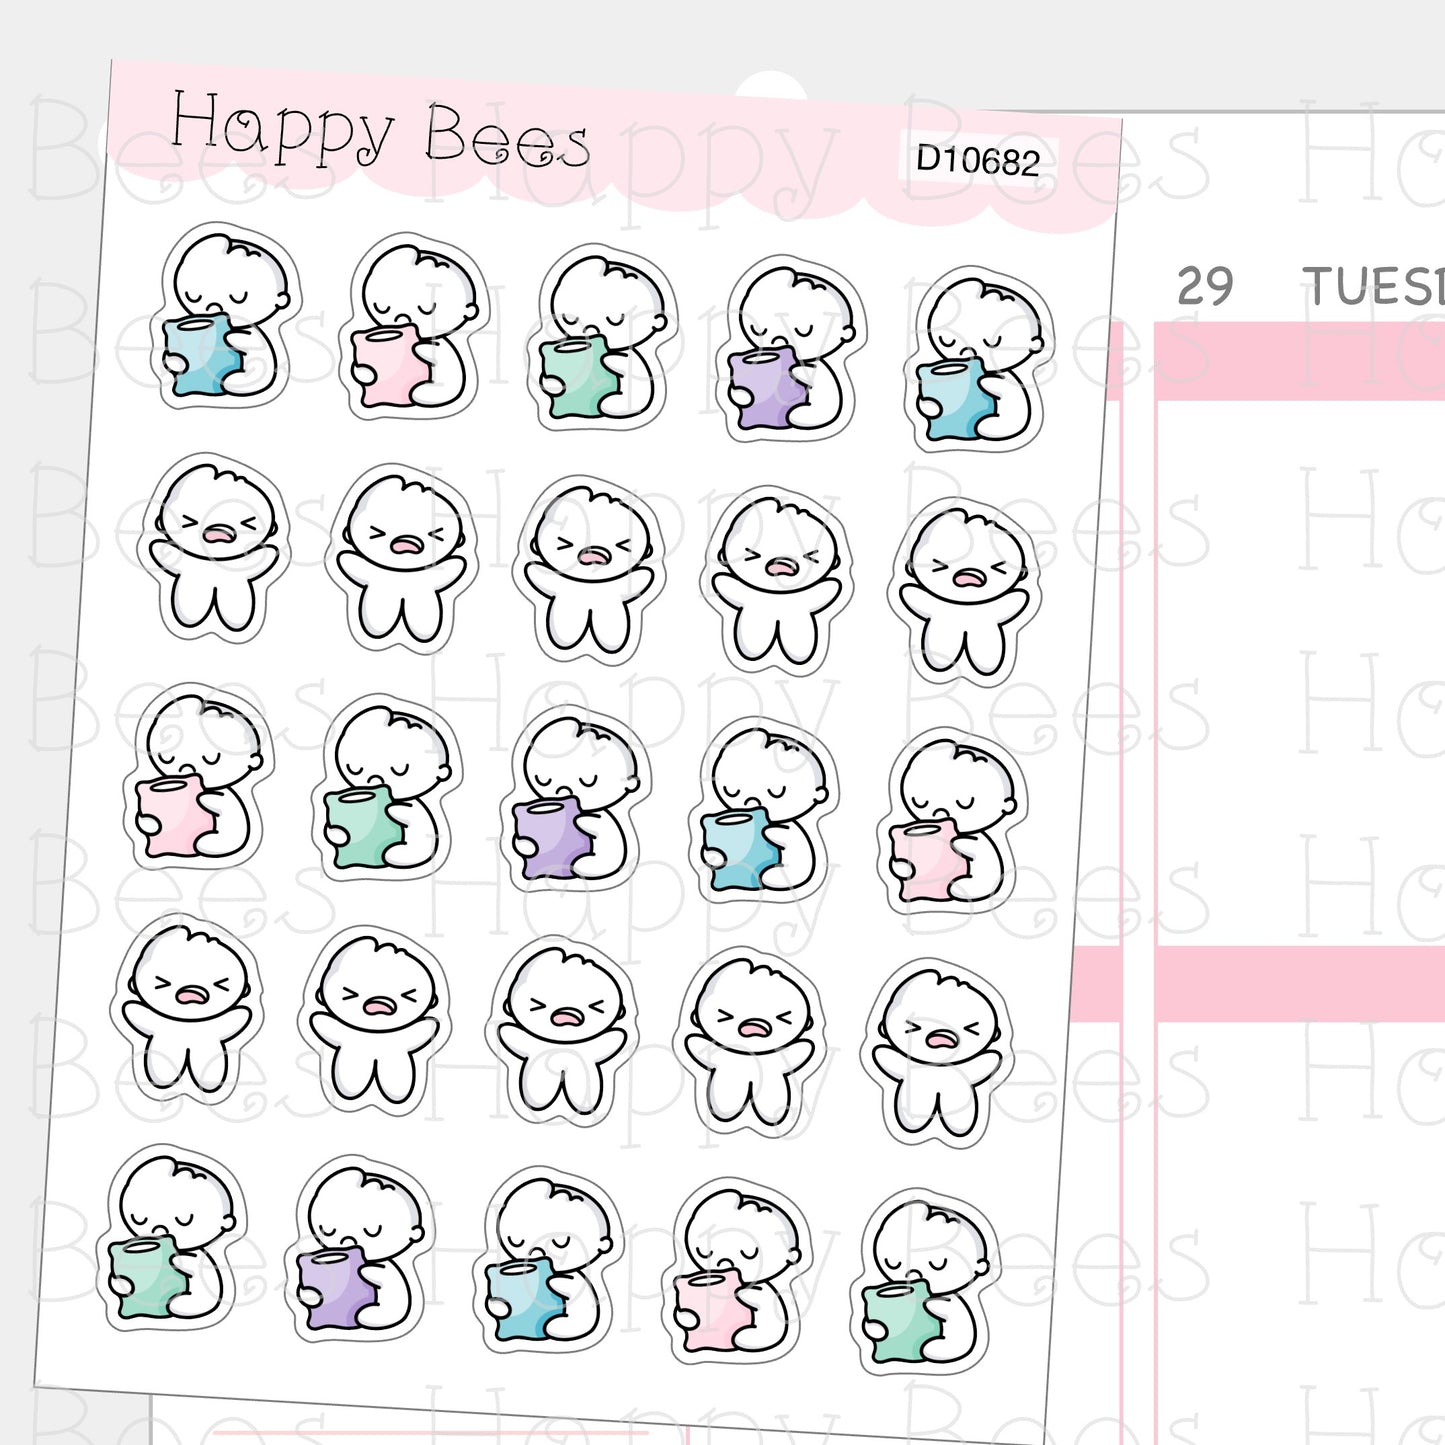 Bad Days - Cute Doodles Self Care Planner Stickers D10682